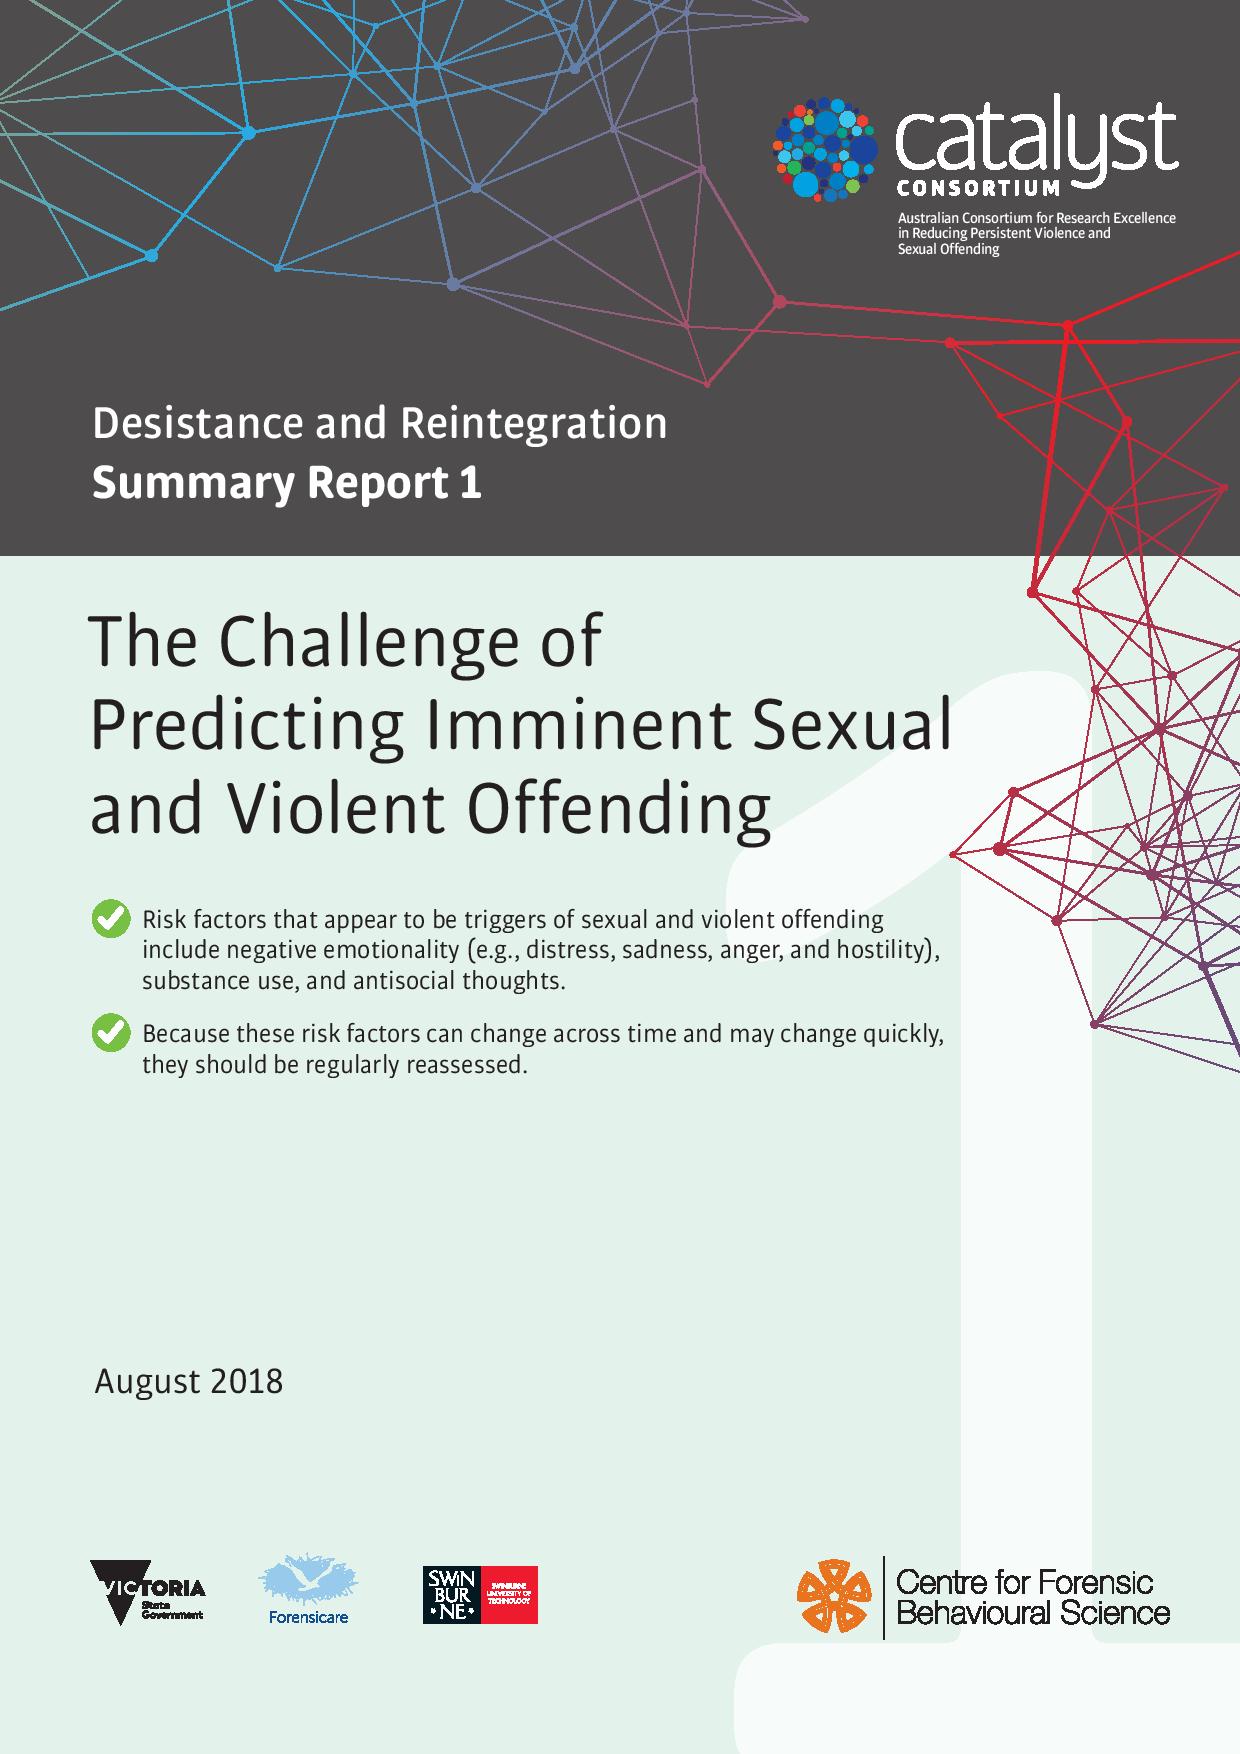 The challenge of predicting imminent sexual and violent offending